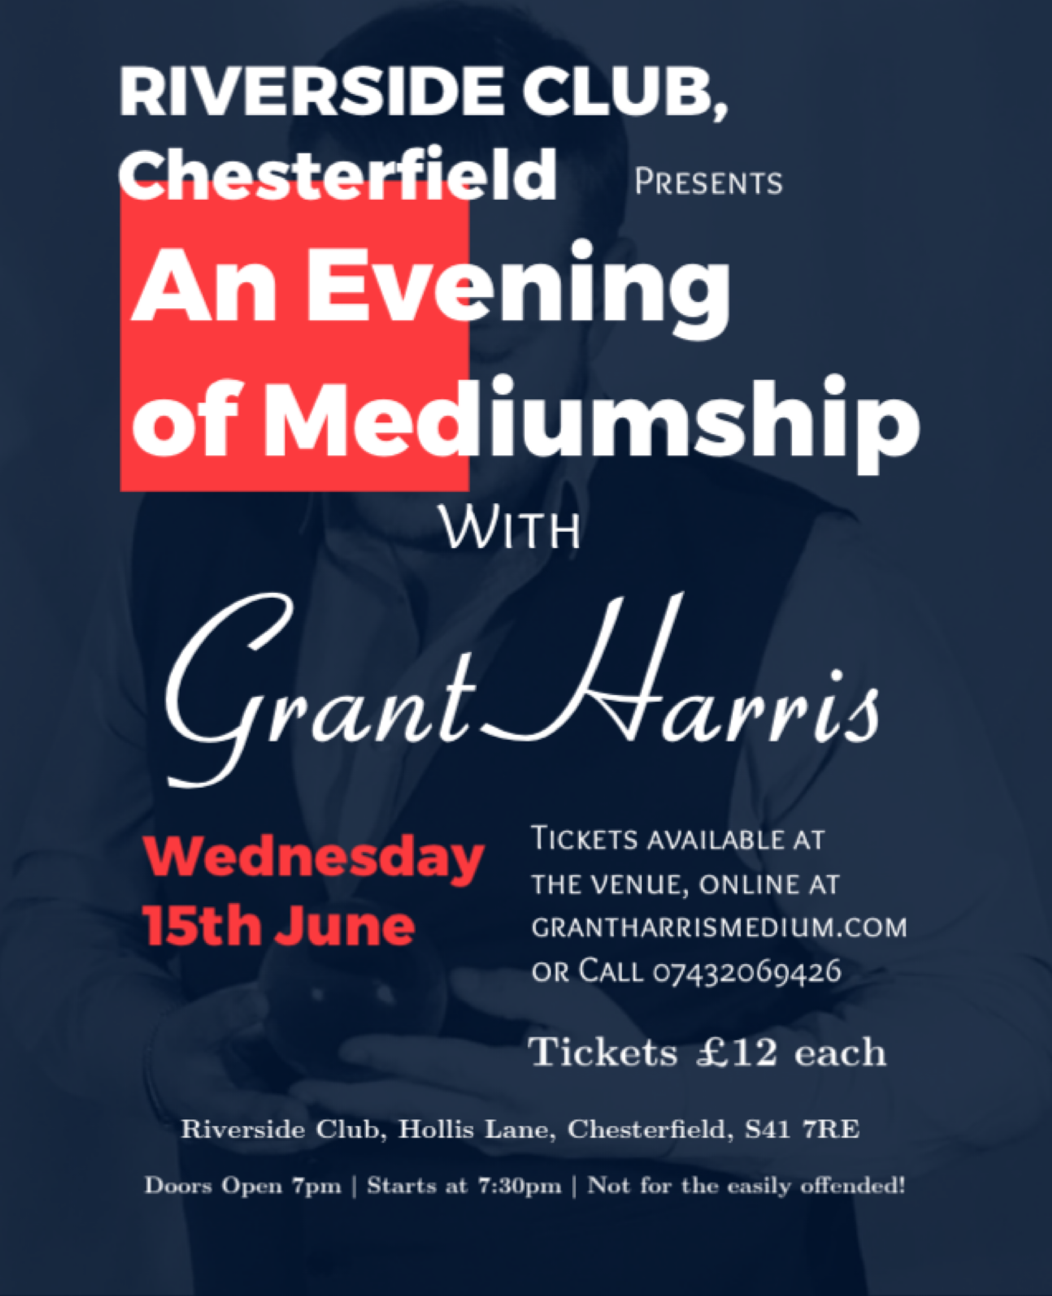 Evening of Mediumship, The Riverside, Chesterfield, Wed 15th June 2022